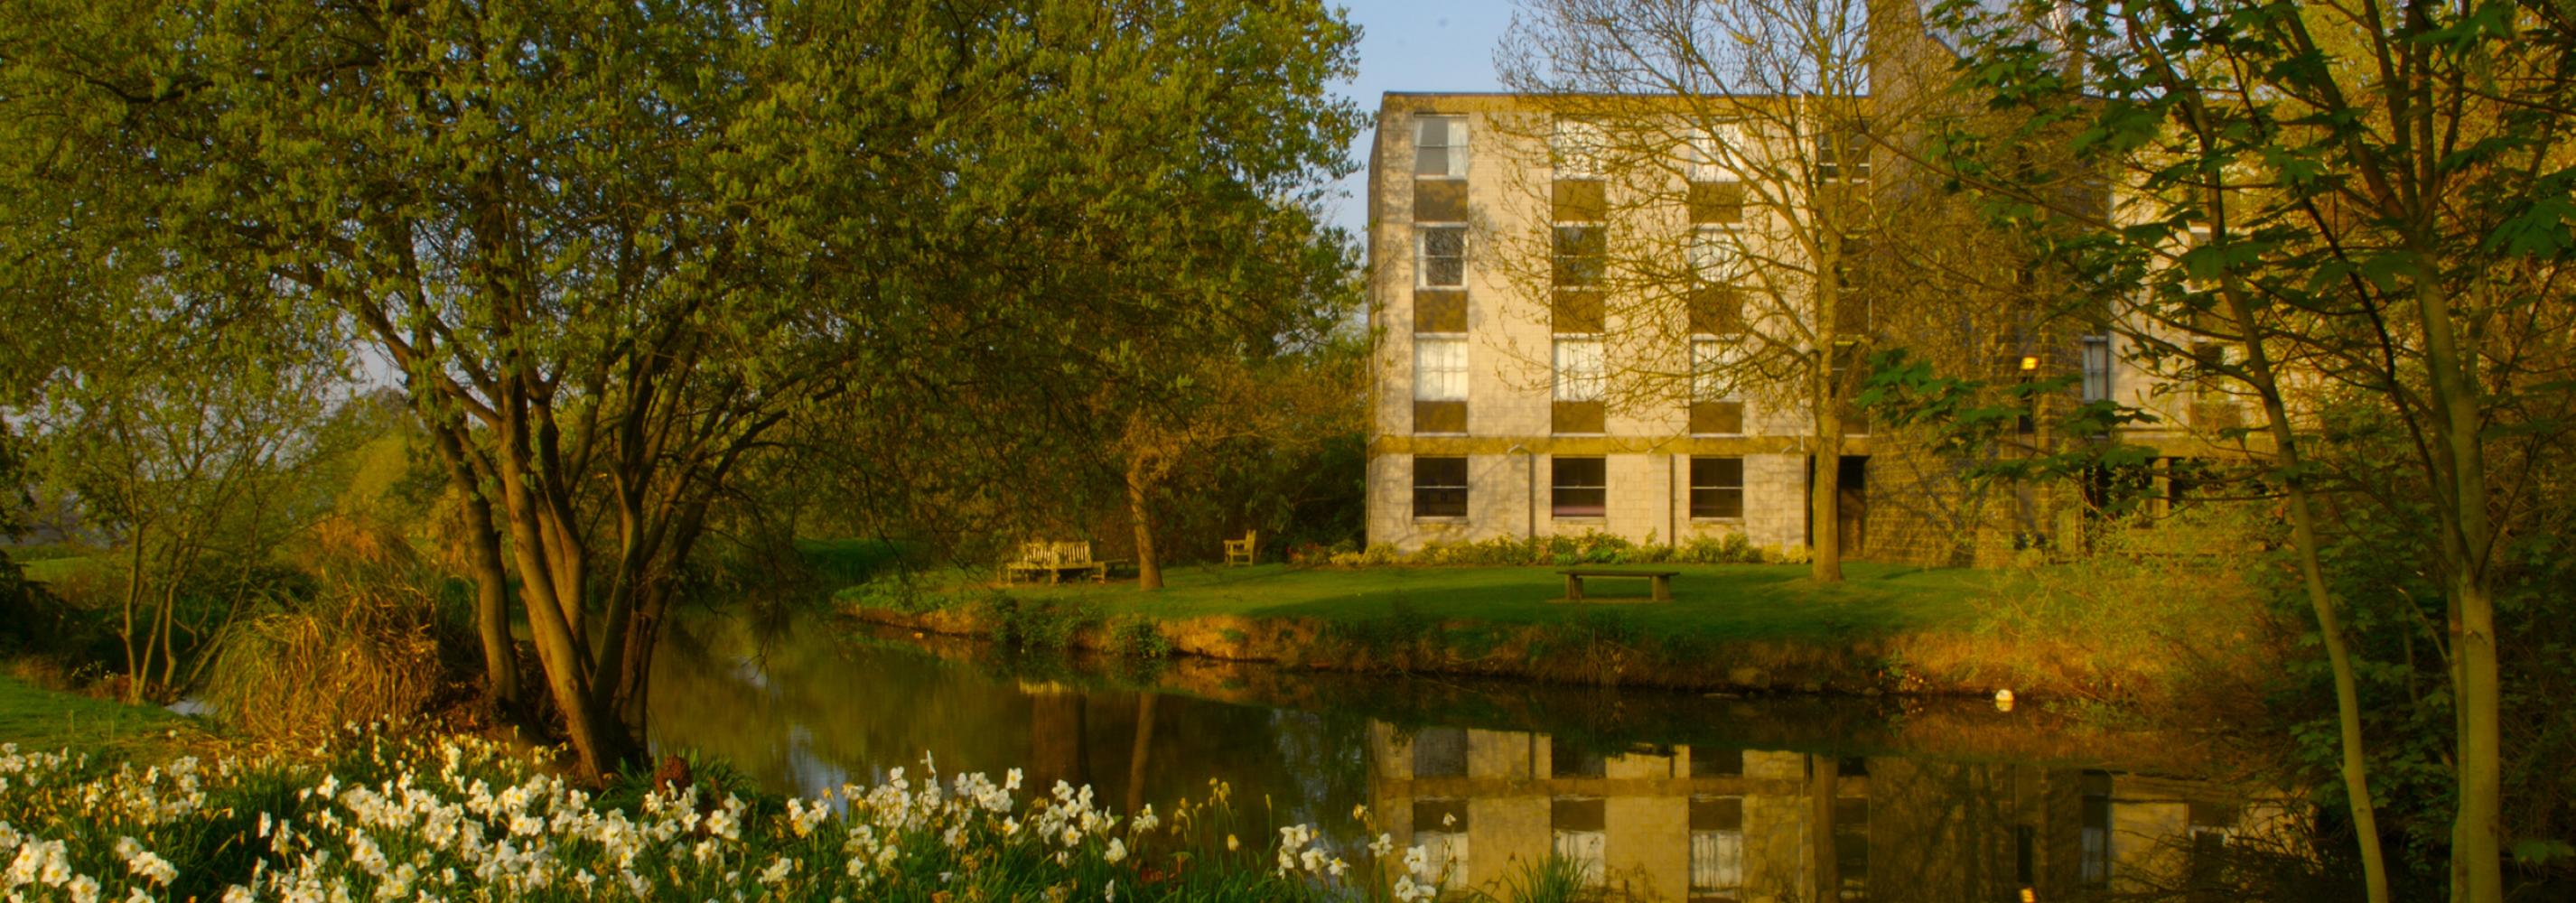 Keynes College exterior and duck pond